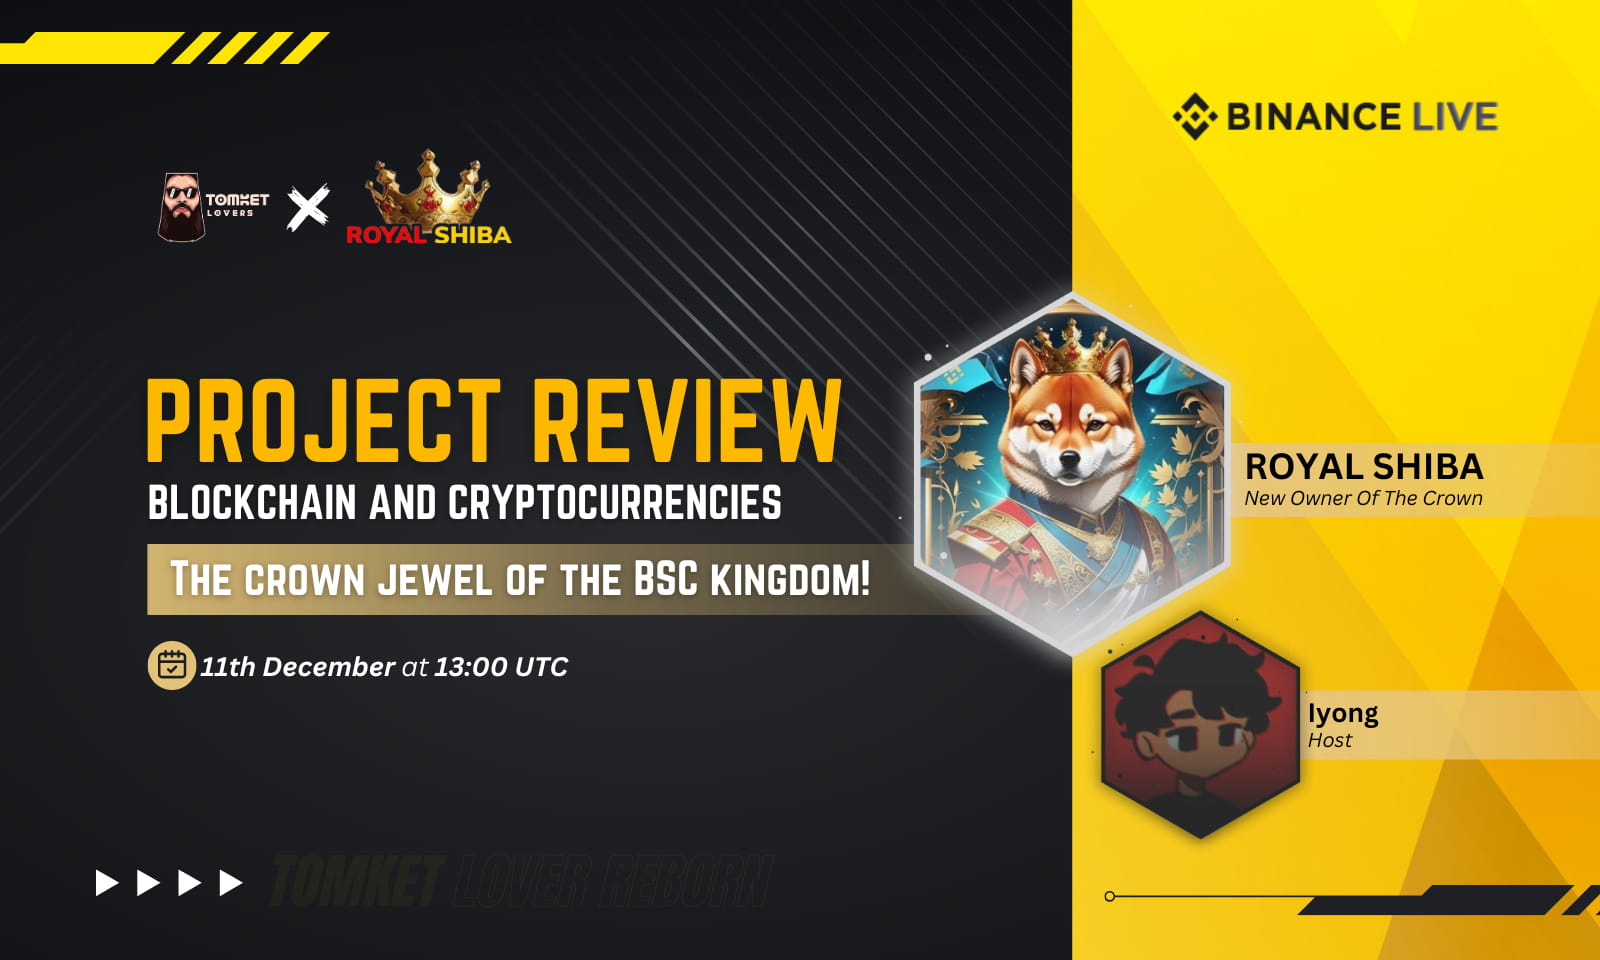 Project Review : The crown jewel of the BSC kingdom!